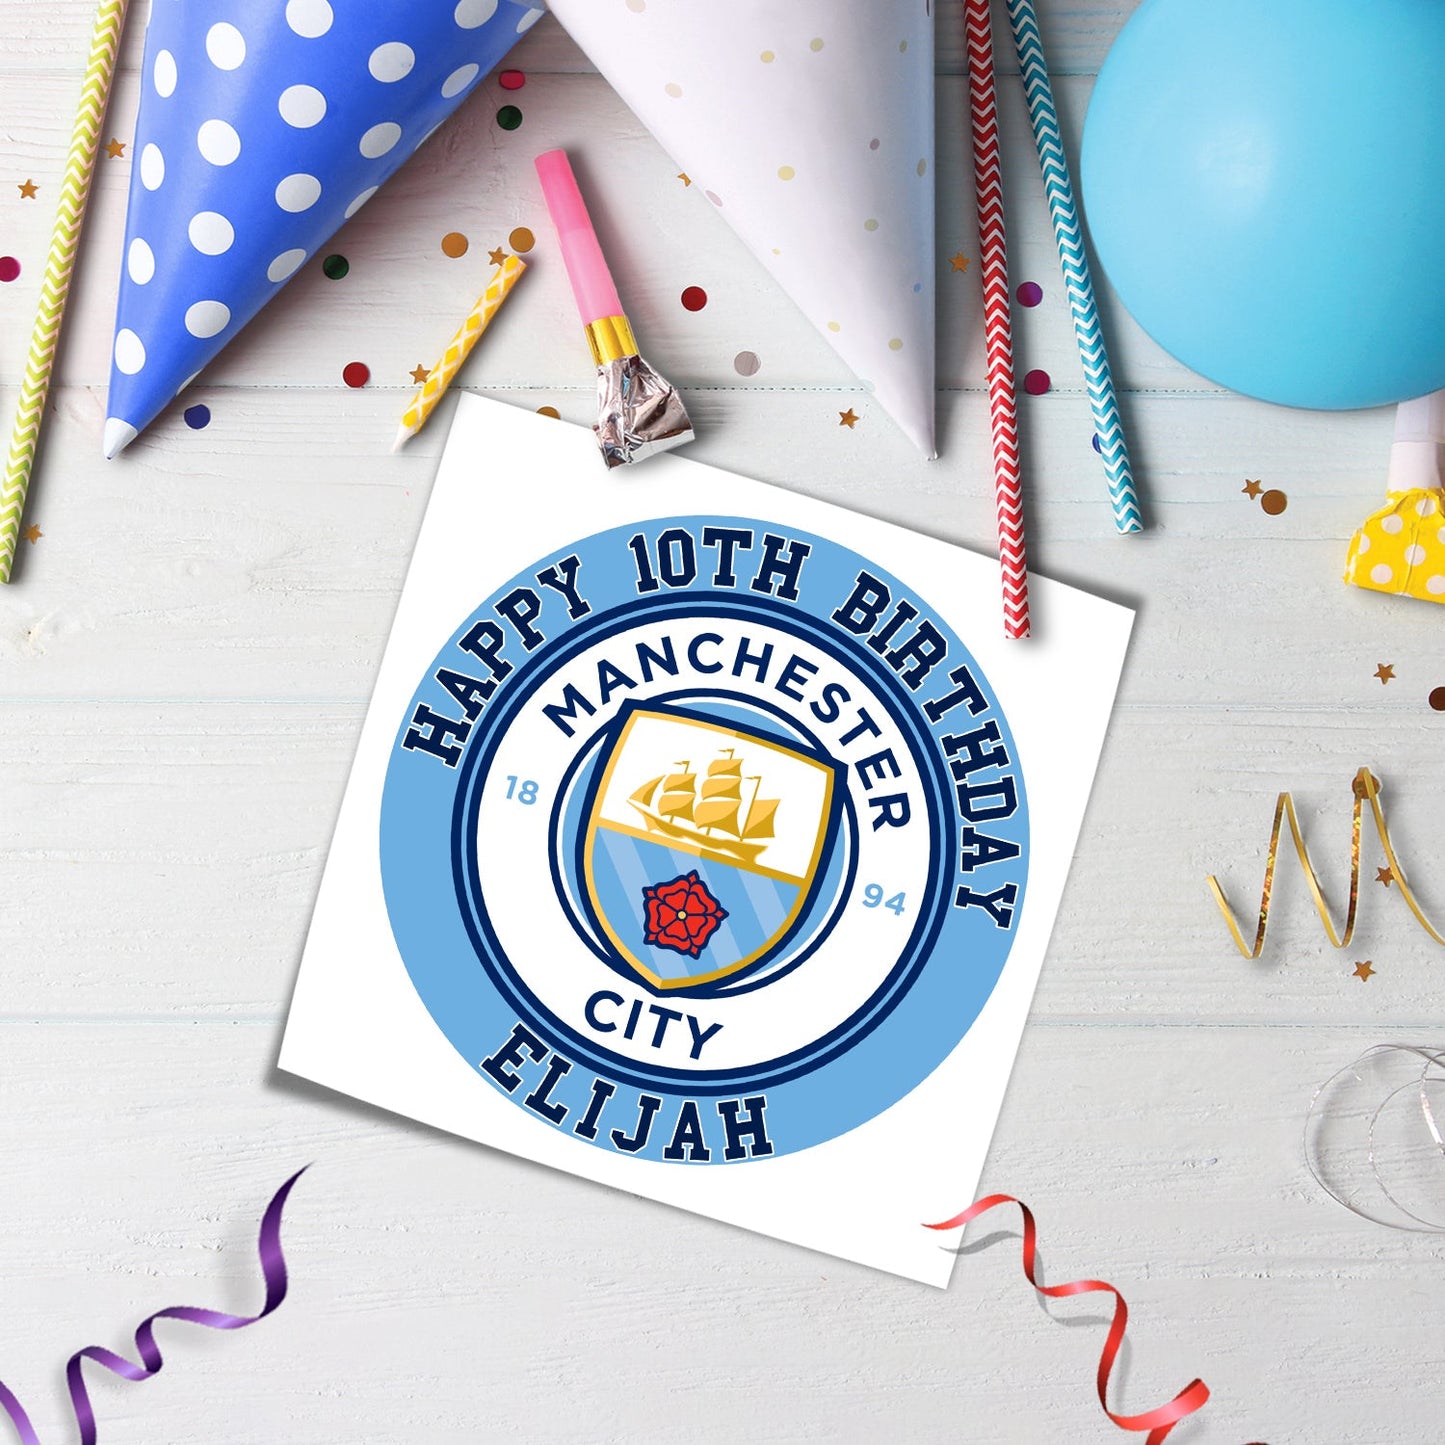 Round Manchester City FC Personalized Cake Images - Add a Personal Touch to Your Party